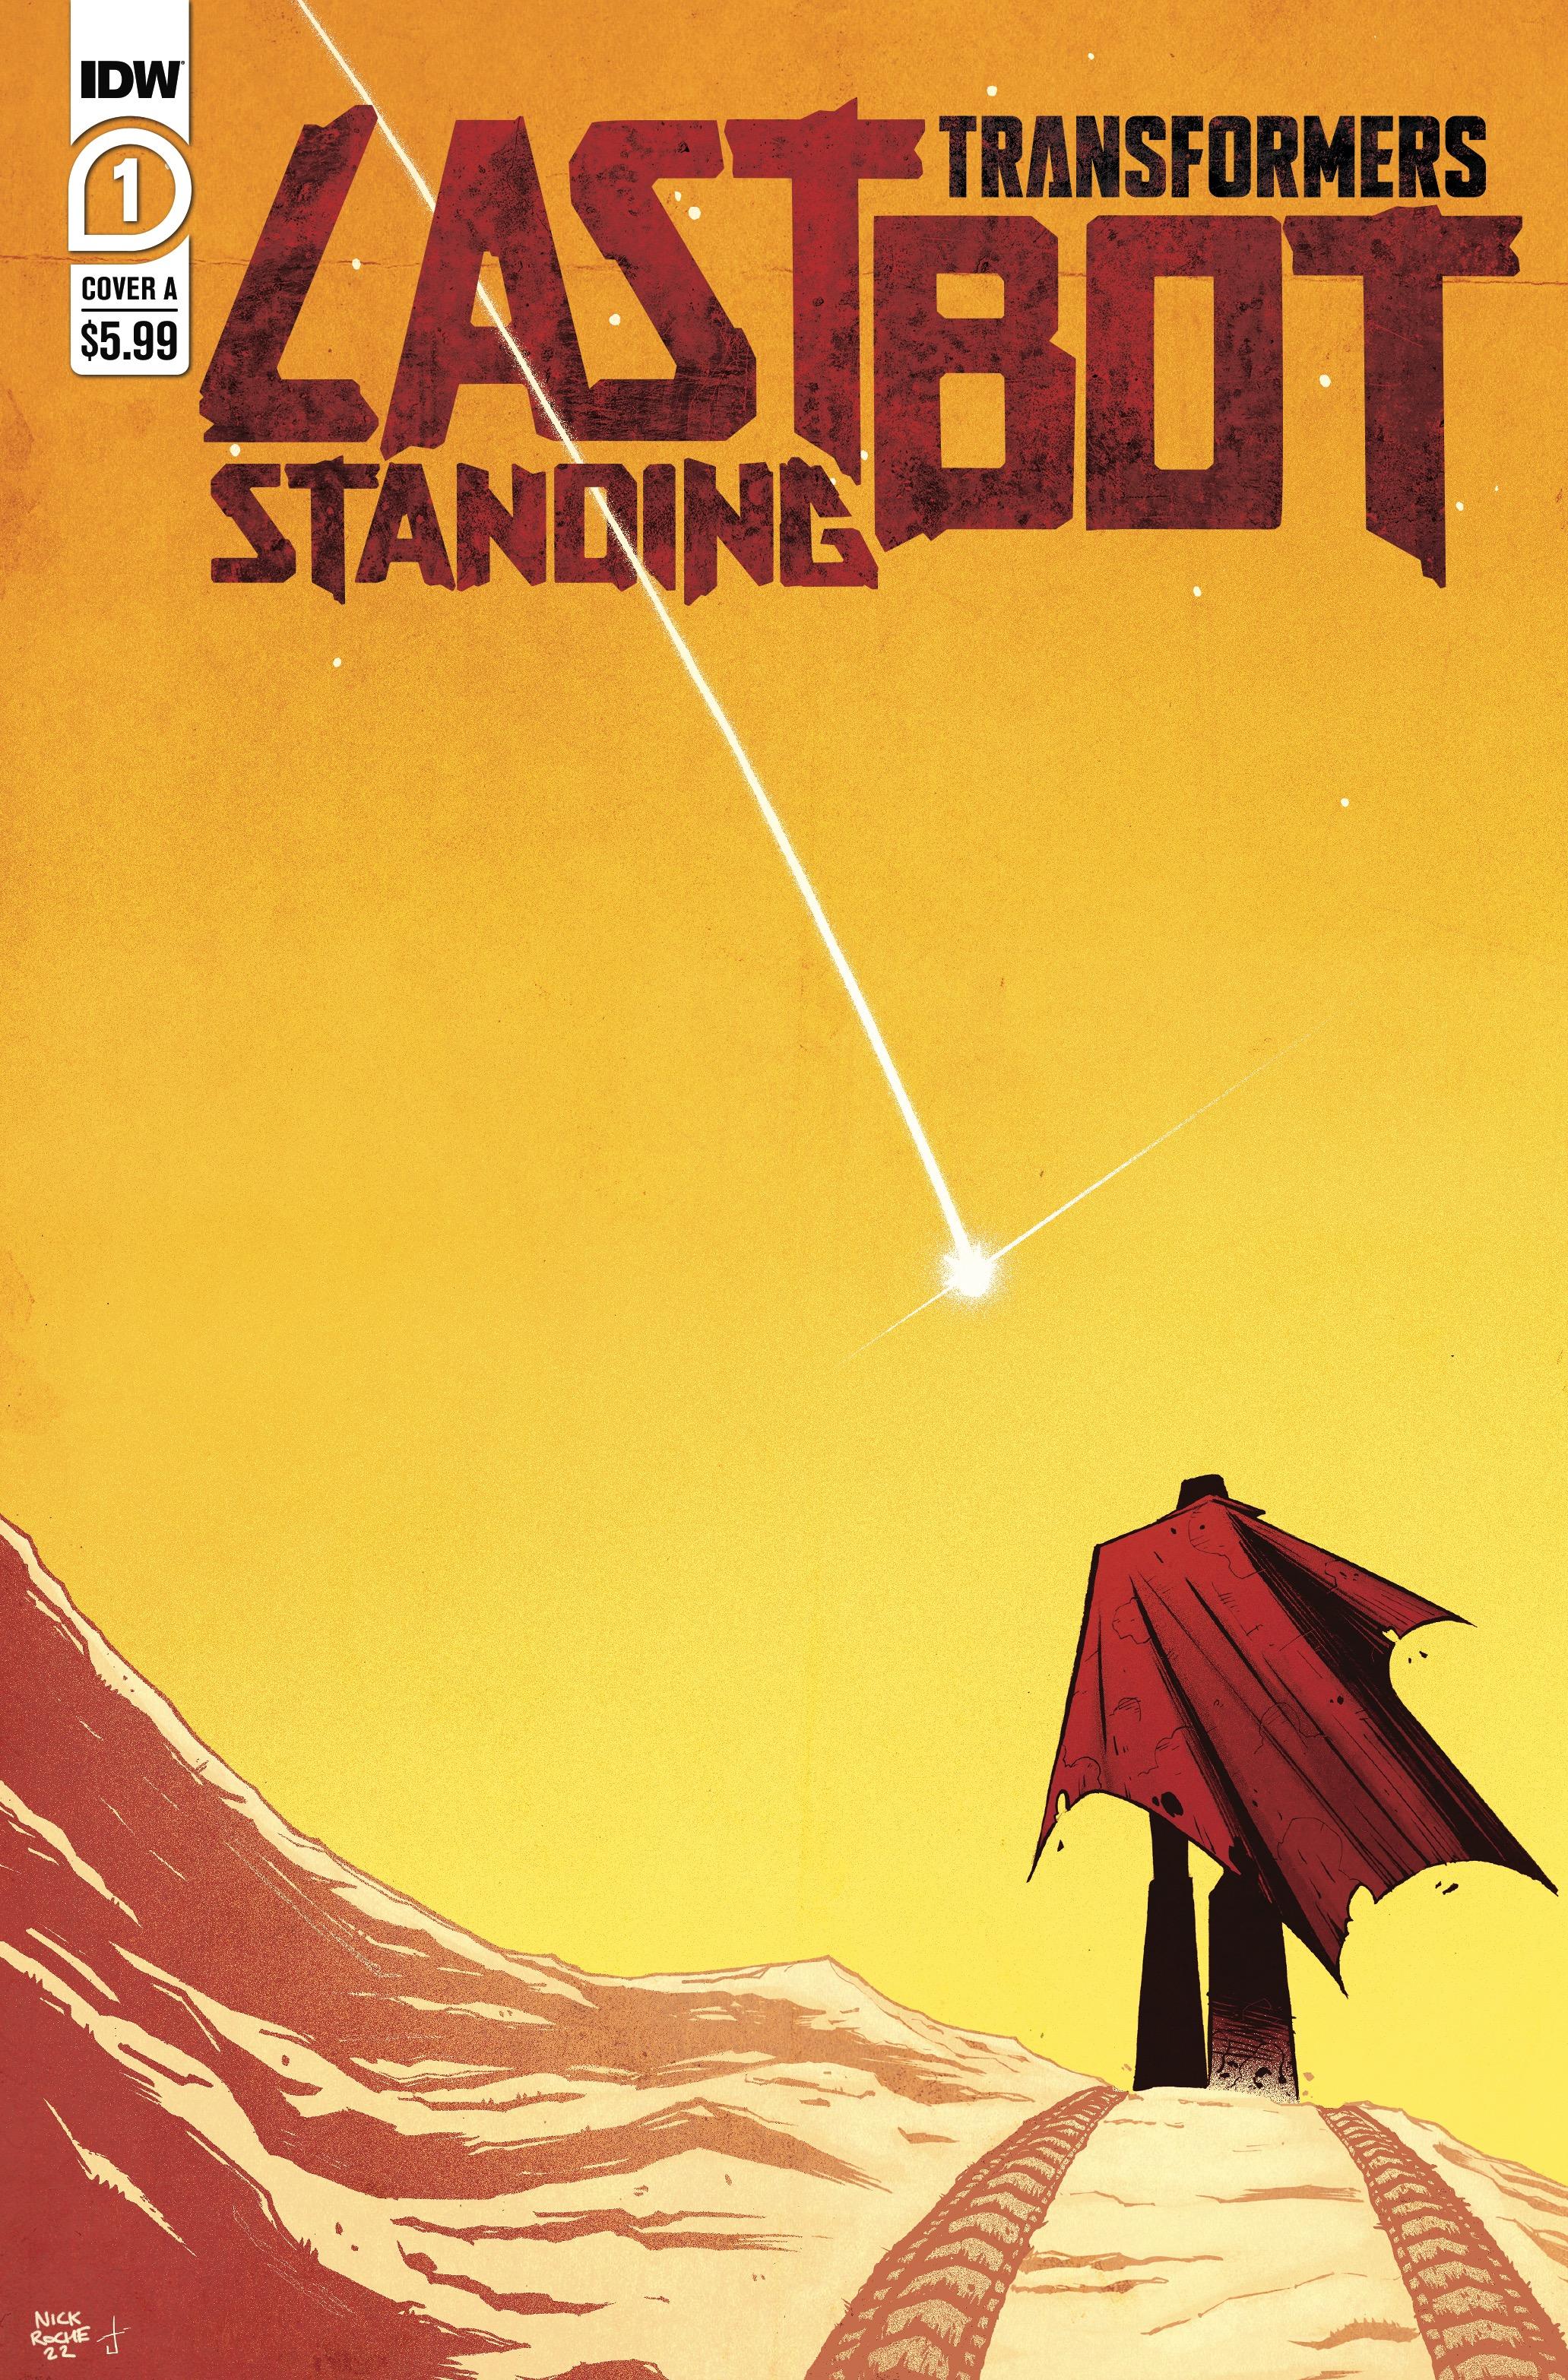 tflastbotstanding-01-cover-a.jpg